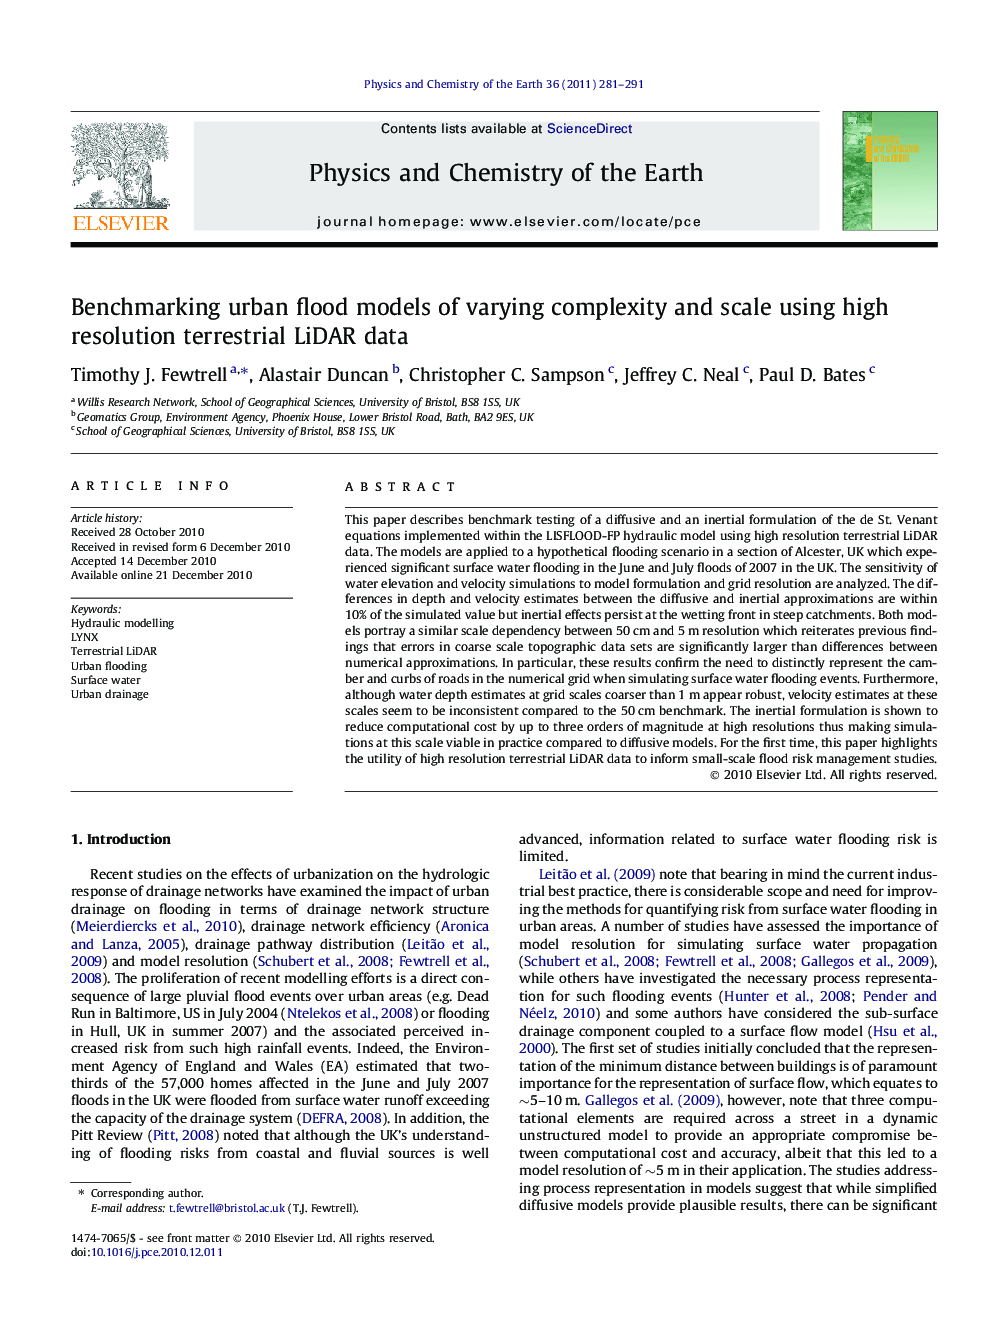 Benchmarking urban flood models of varying complexity and scale using high resolution terrestrial LiDAR data